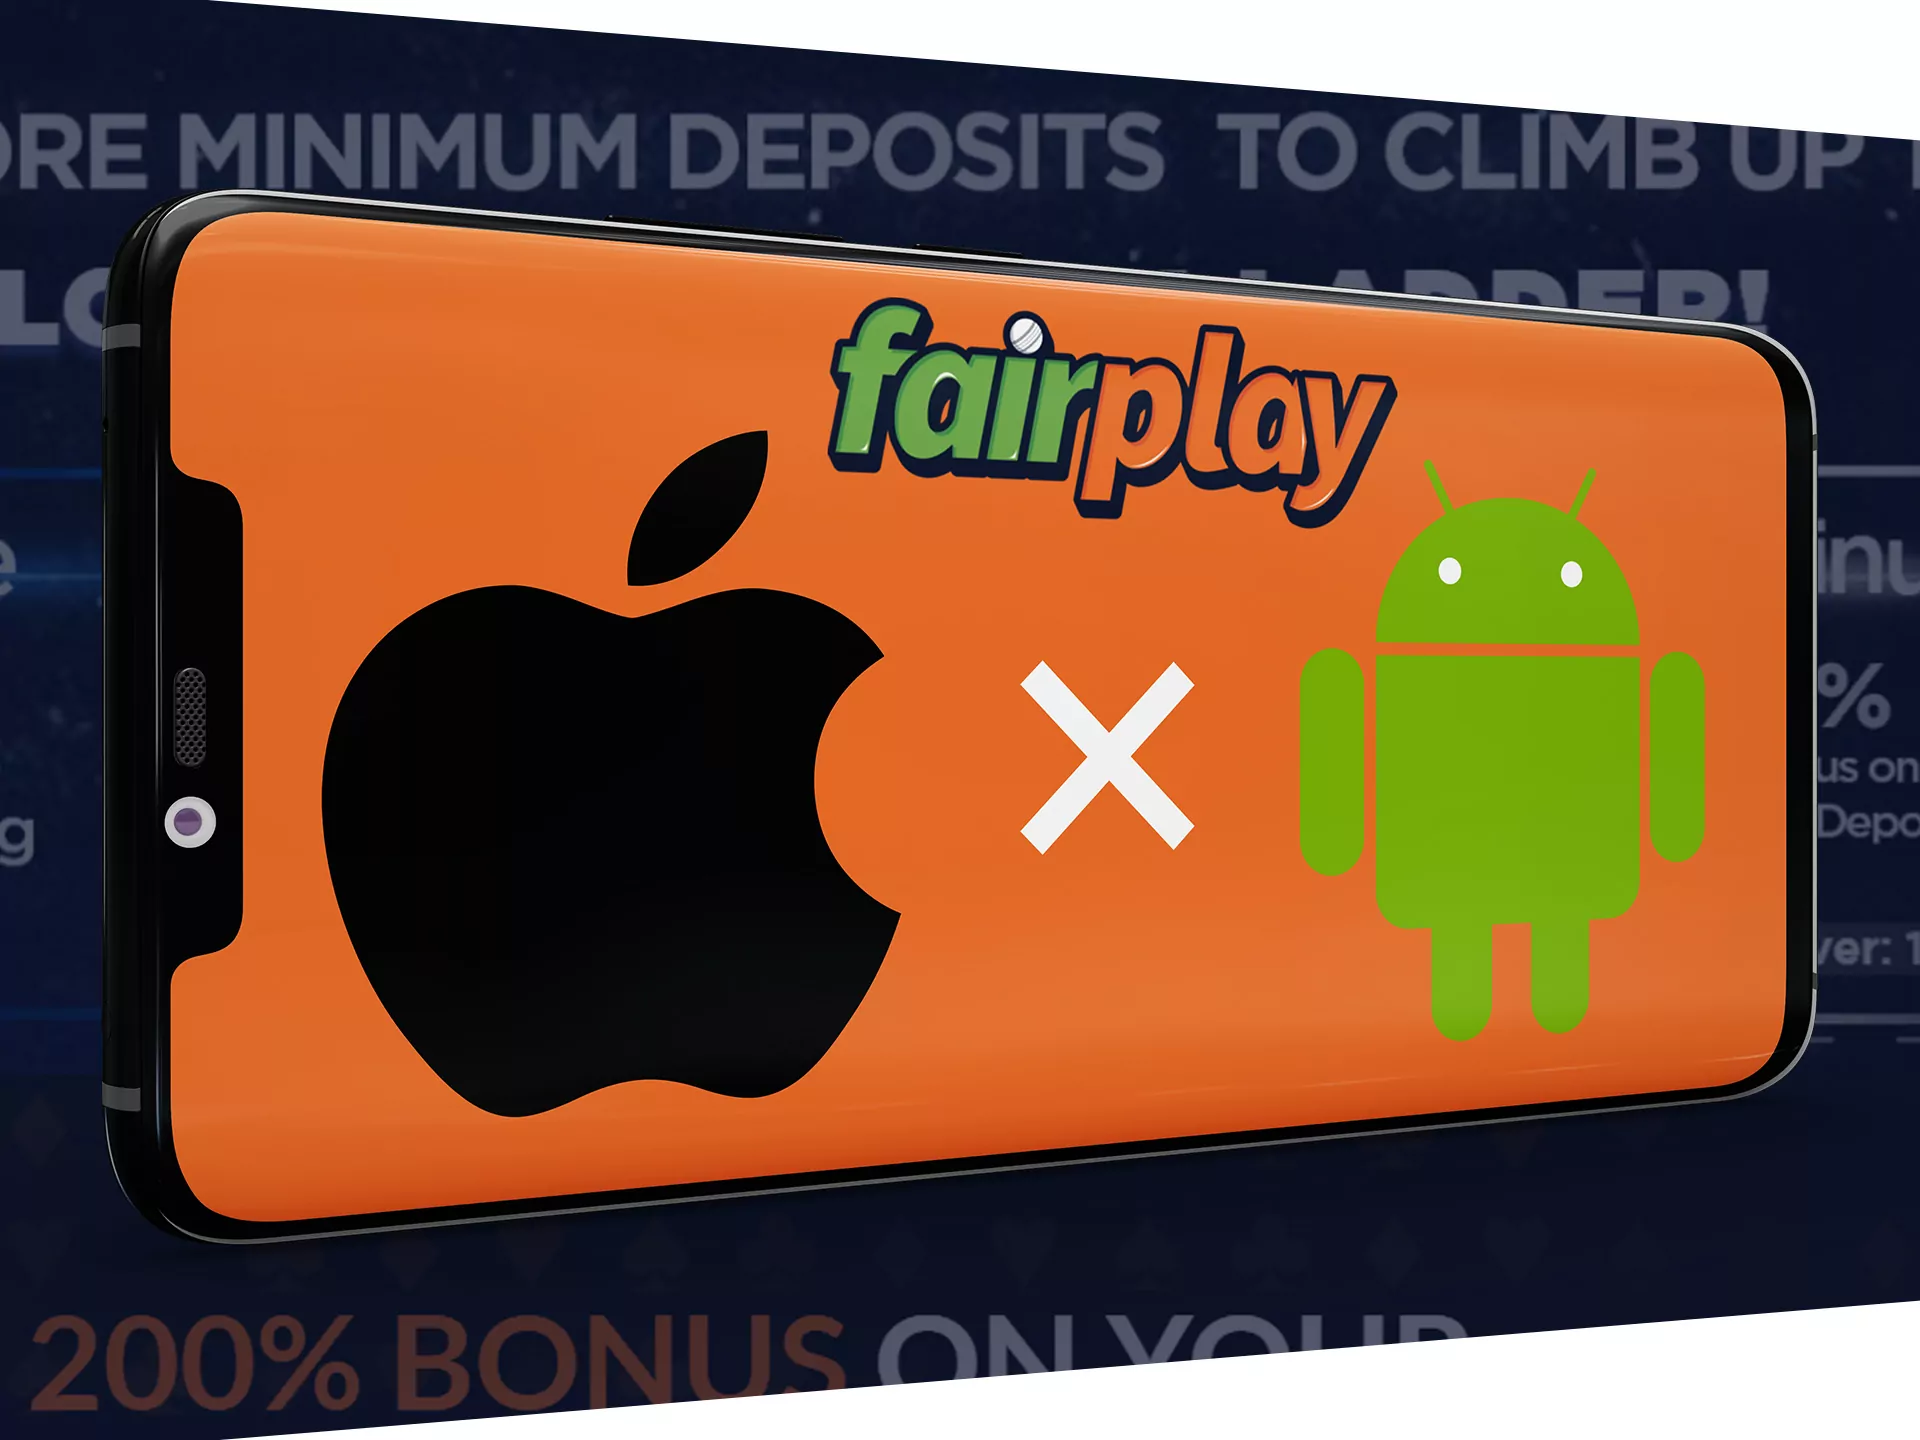 You can download the Fairplay app on any your device.